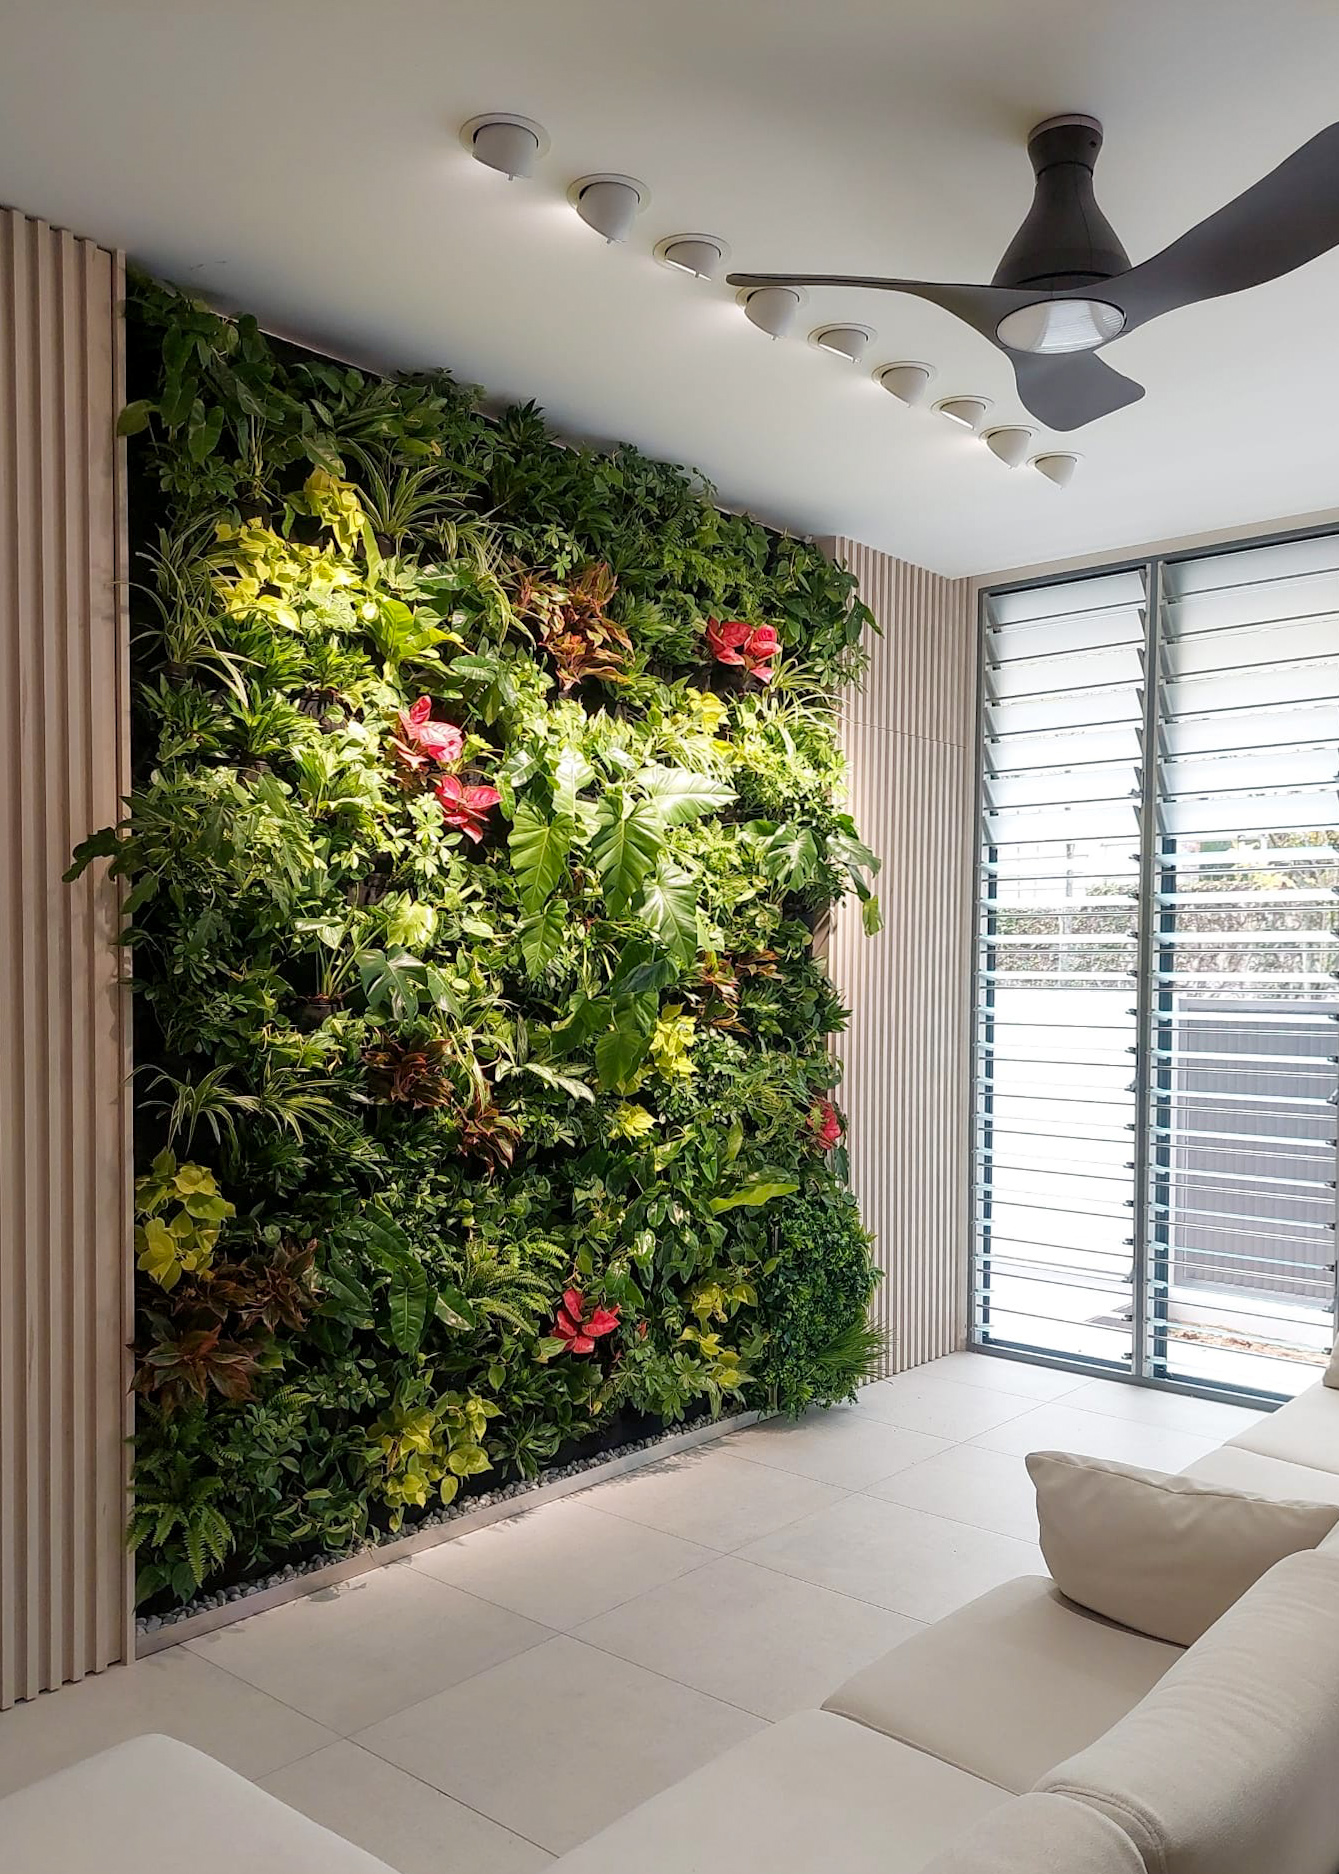 Residential green wall systems Indoor green wall for home Living plant walls residential Eco-friendly home wall garden Vertical garden systems for homes Sustainable home decor with green walls DIY green wall kits residential Green wall benefits for homes Interior design green walls Home improvement vertical plant wall